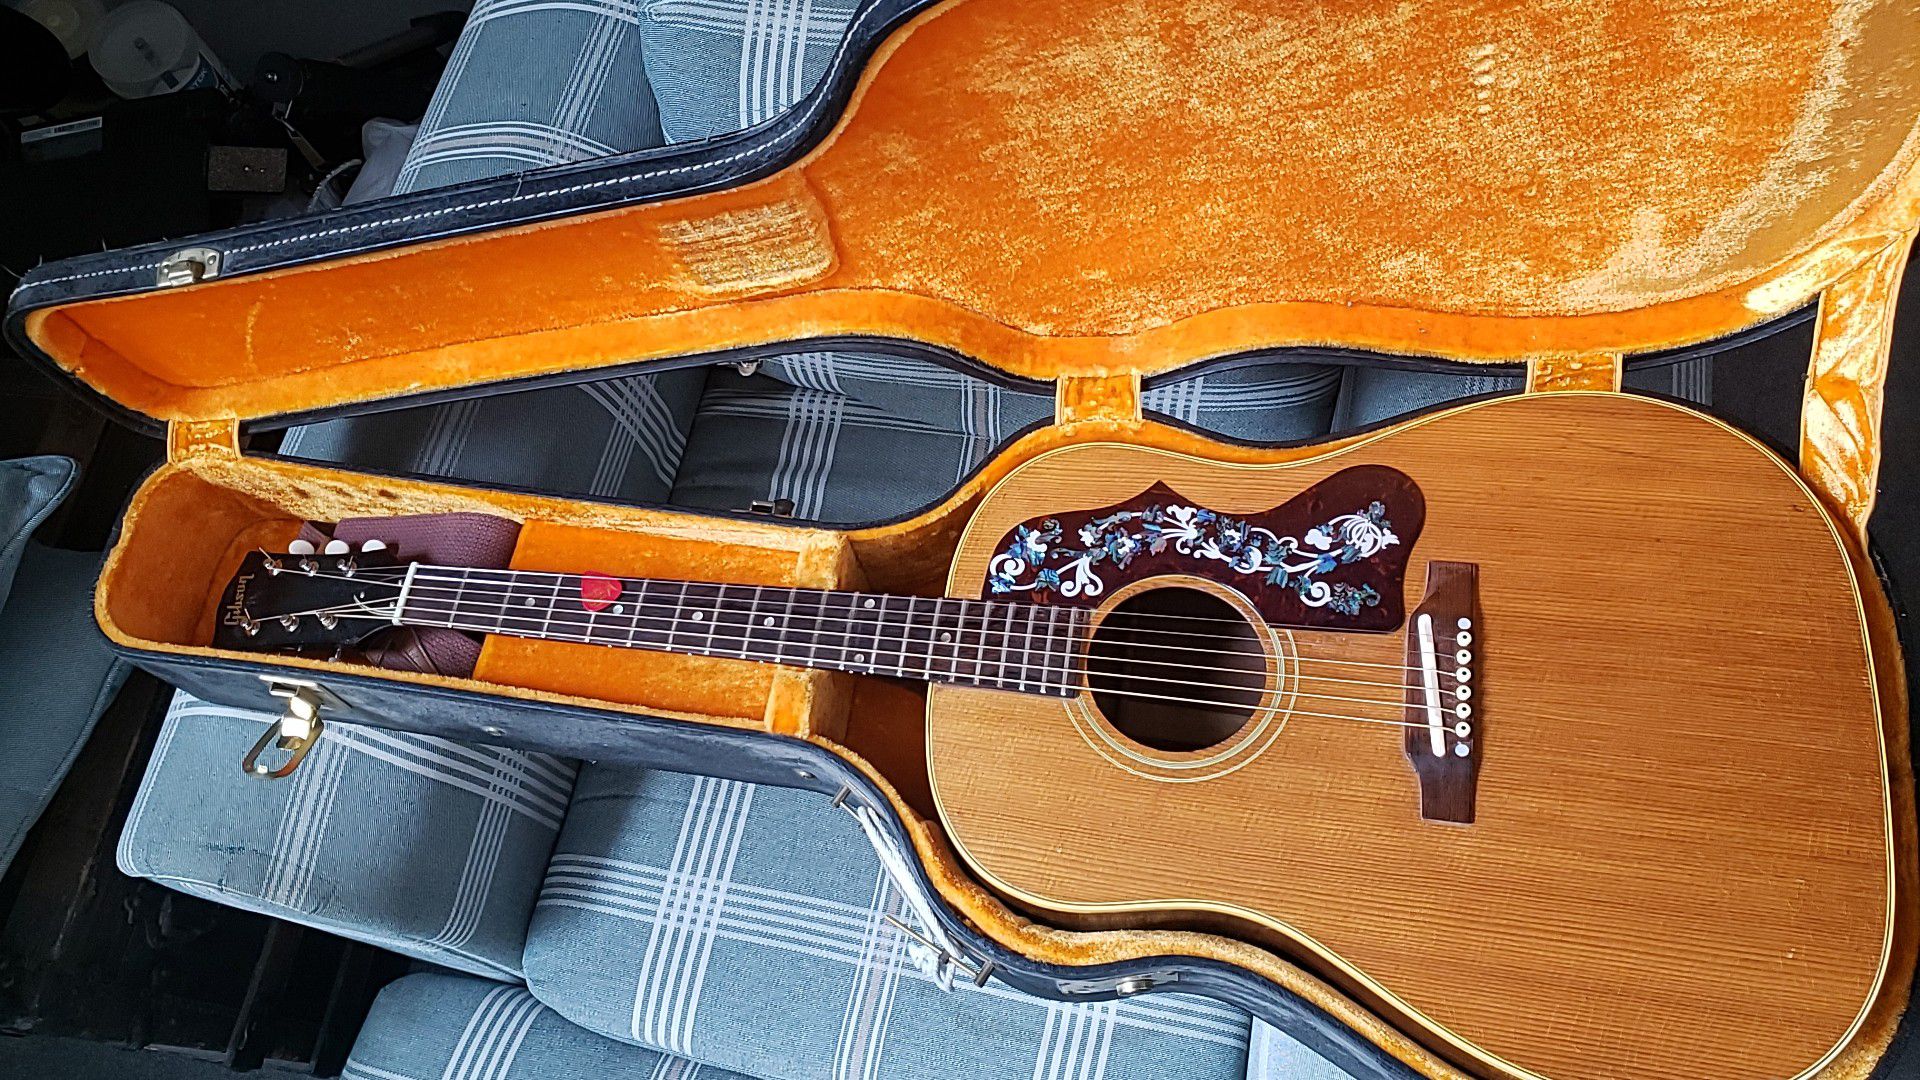 1973 Gibson J50 acoustic guitar